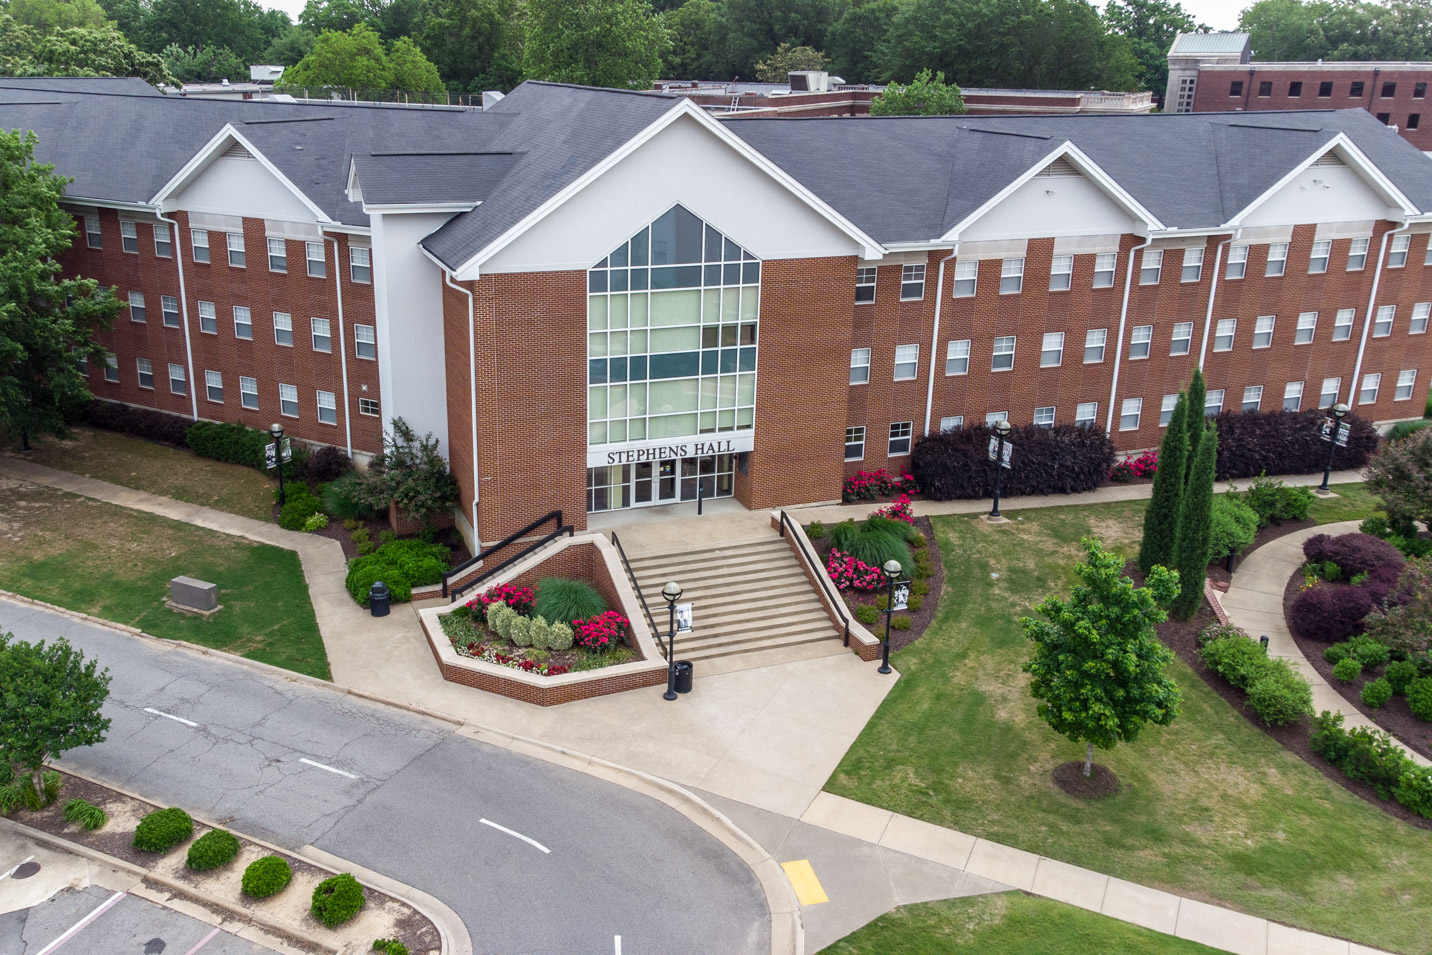 This is a photo of Stephens Hall, a women's residence hall at Harding University.